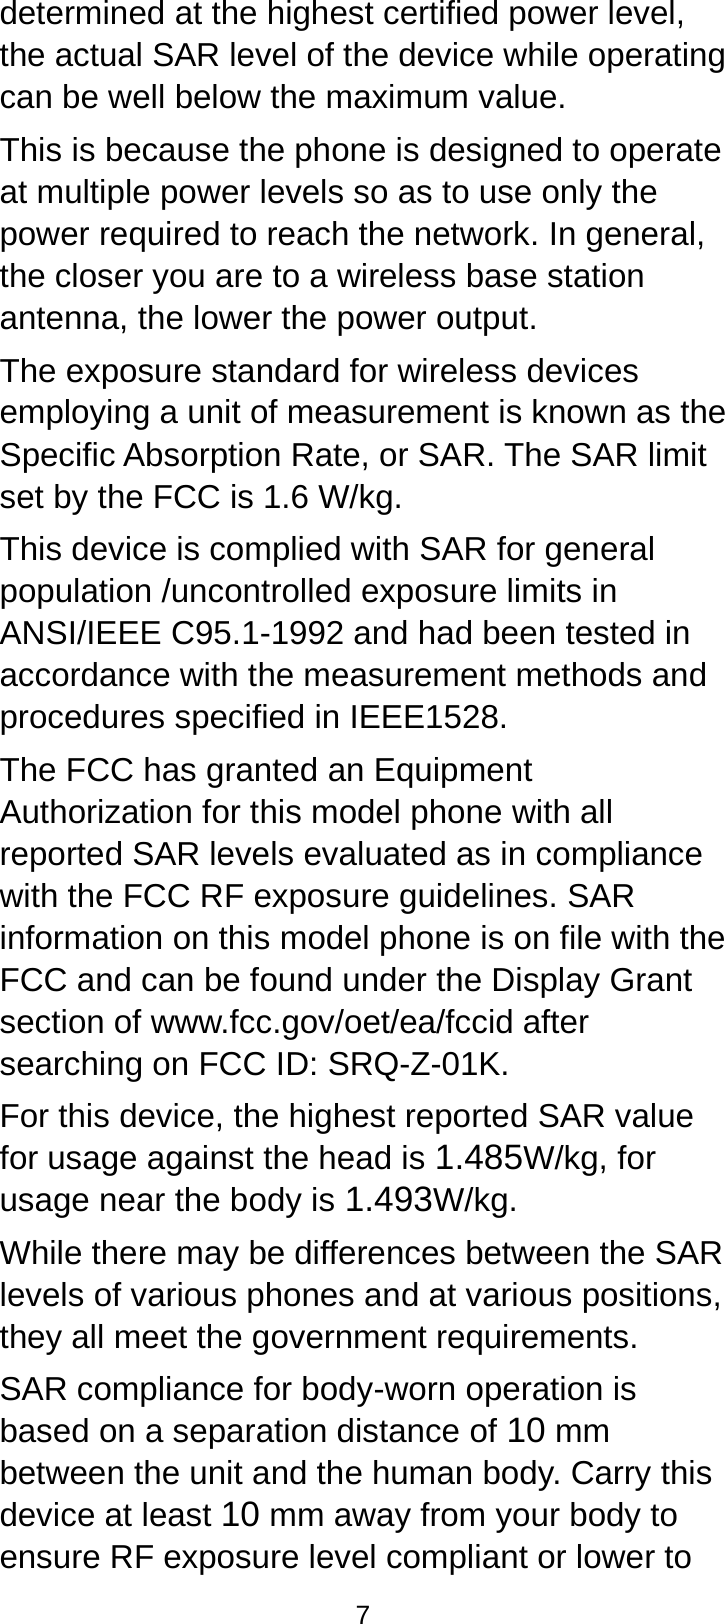  7 determined at the highest certified power level, the actual SAR level of the device while operating can be well below the maximum value.   This is because the phone is designed to operate at multiple power levels so as to use only the power required to reach the network. In general, the closer you are to a wireless base station antenna, the lower the power output. The exposure standard for wireless devices employing a unit of measurement is known as the Specific Absorption Rate, or SAR. The SAR limit set by the FCC is 1.6 W/kg. This device is complied with SAR for general population /uncontrolled exposure limits in ANSI/IEEE C95.1-1992 and had been tested in accordance with the measurement methods and procedures specified in IEEE1528. The FCC has granted an Equipment Authorization for this model phone with all reported SAR levels evaluated as in compliance with the FCC RF exposure guidelines. SAR information on this model phone is on file with the FCC and can be found under the Display Grant section of www.fcc.gov/oet/ea/fccid after searching on FCC ID: SRQ-Z-01K. For this device, the highest reported SAR value for usage against the head is 1.485W/kg, for usage near the body is 1.493W/kg. While there may be differences between the SAR levels of various phones and at various positions, they all meet the government requirements. SAR compliance for body-worn operation is based on a separation distance of 10 mm between the unit and the human body. Carry this device at least 10 mm away from your body to ensure RF exposure level compliant or lower to 